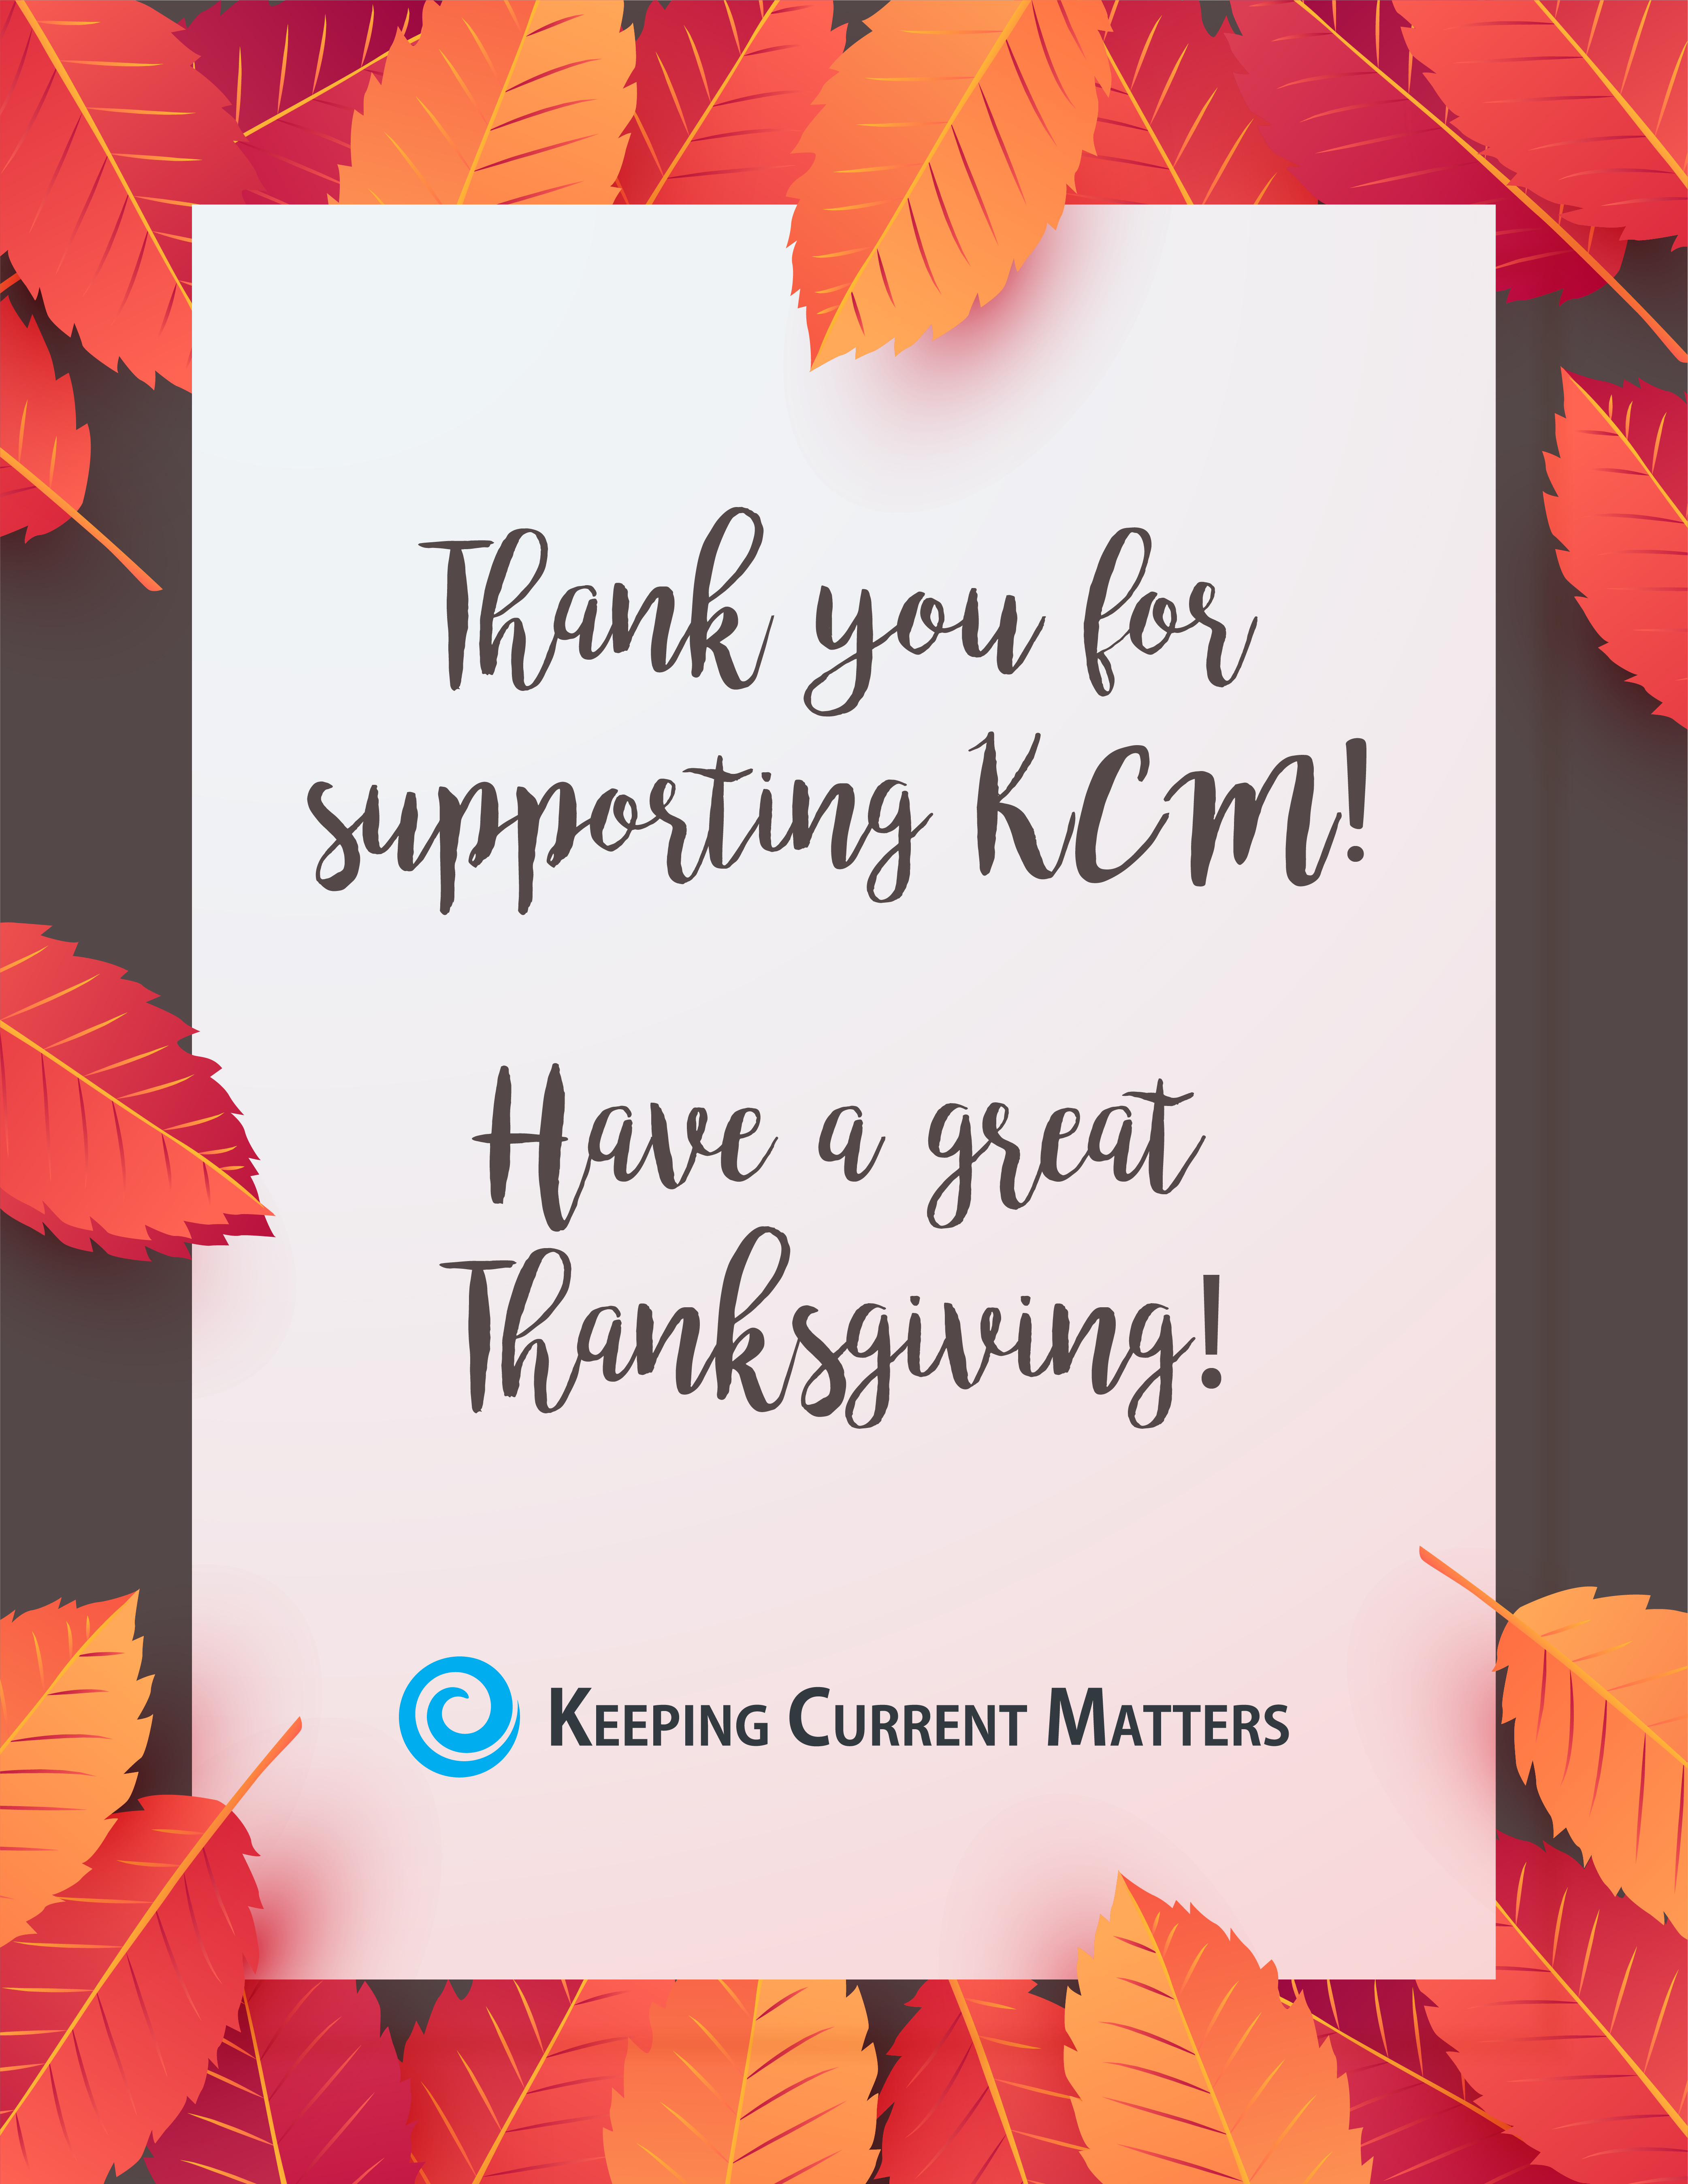 Thank You for Your Support! | Keeping Current Matters